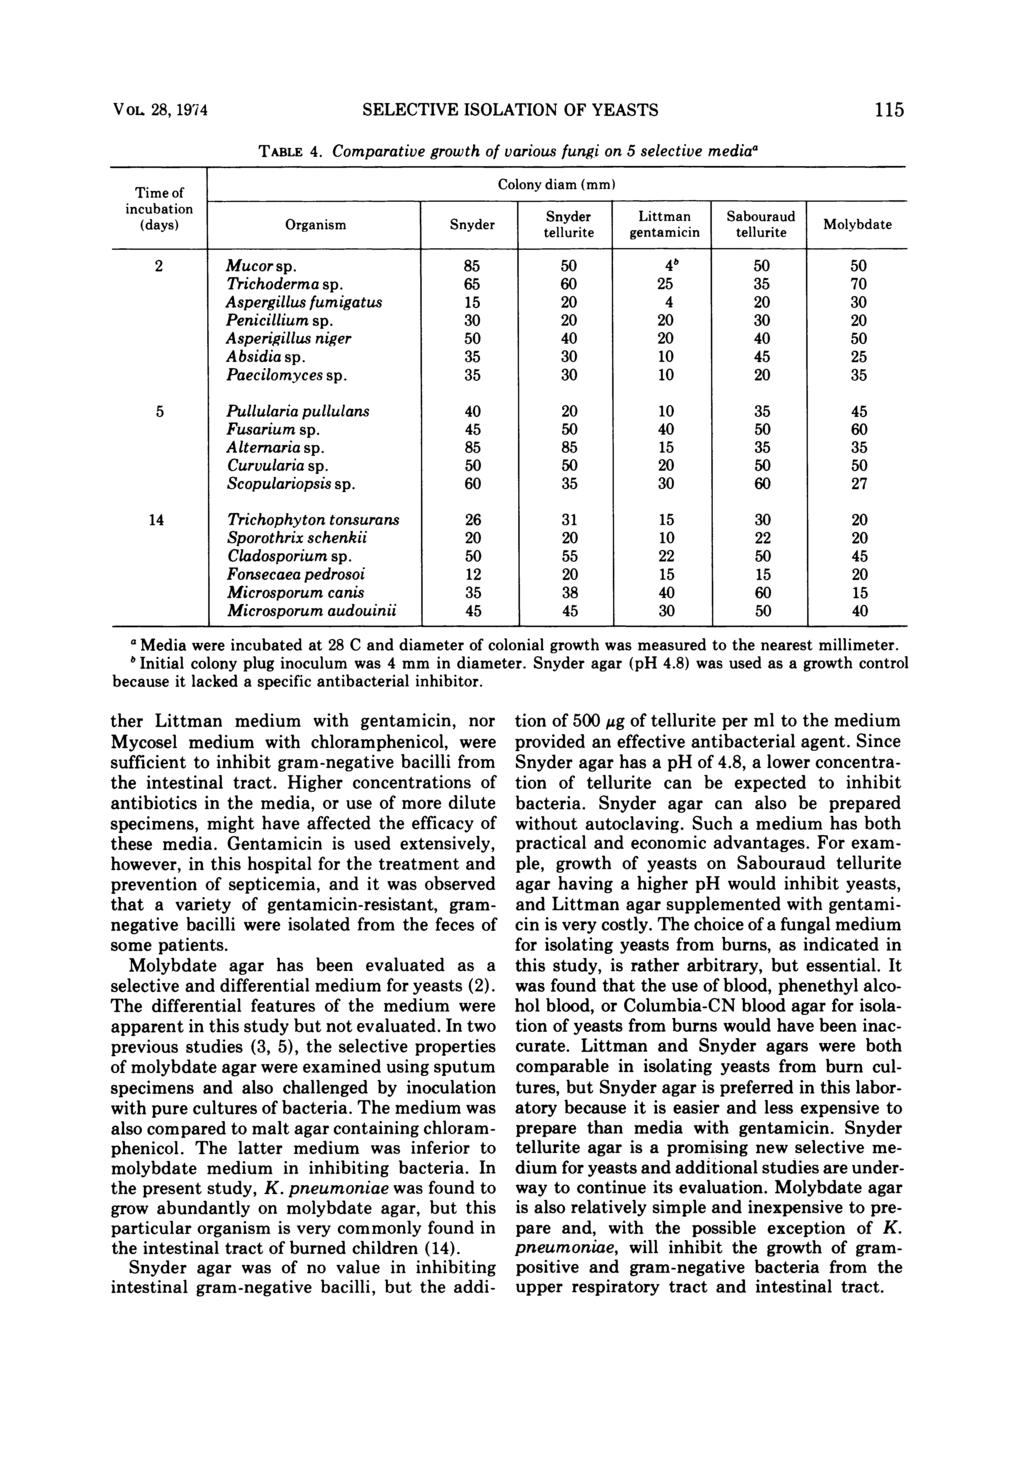 VOL 28, 1974 SELECTIVE ISOLATION OF YEASTS 115 TABLE 4.